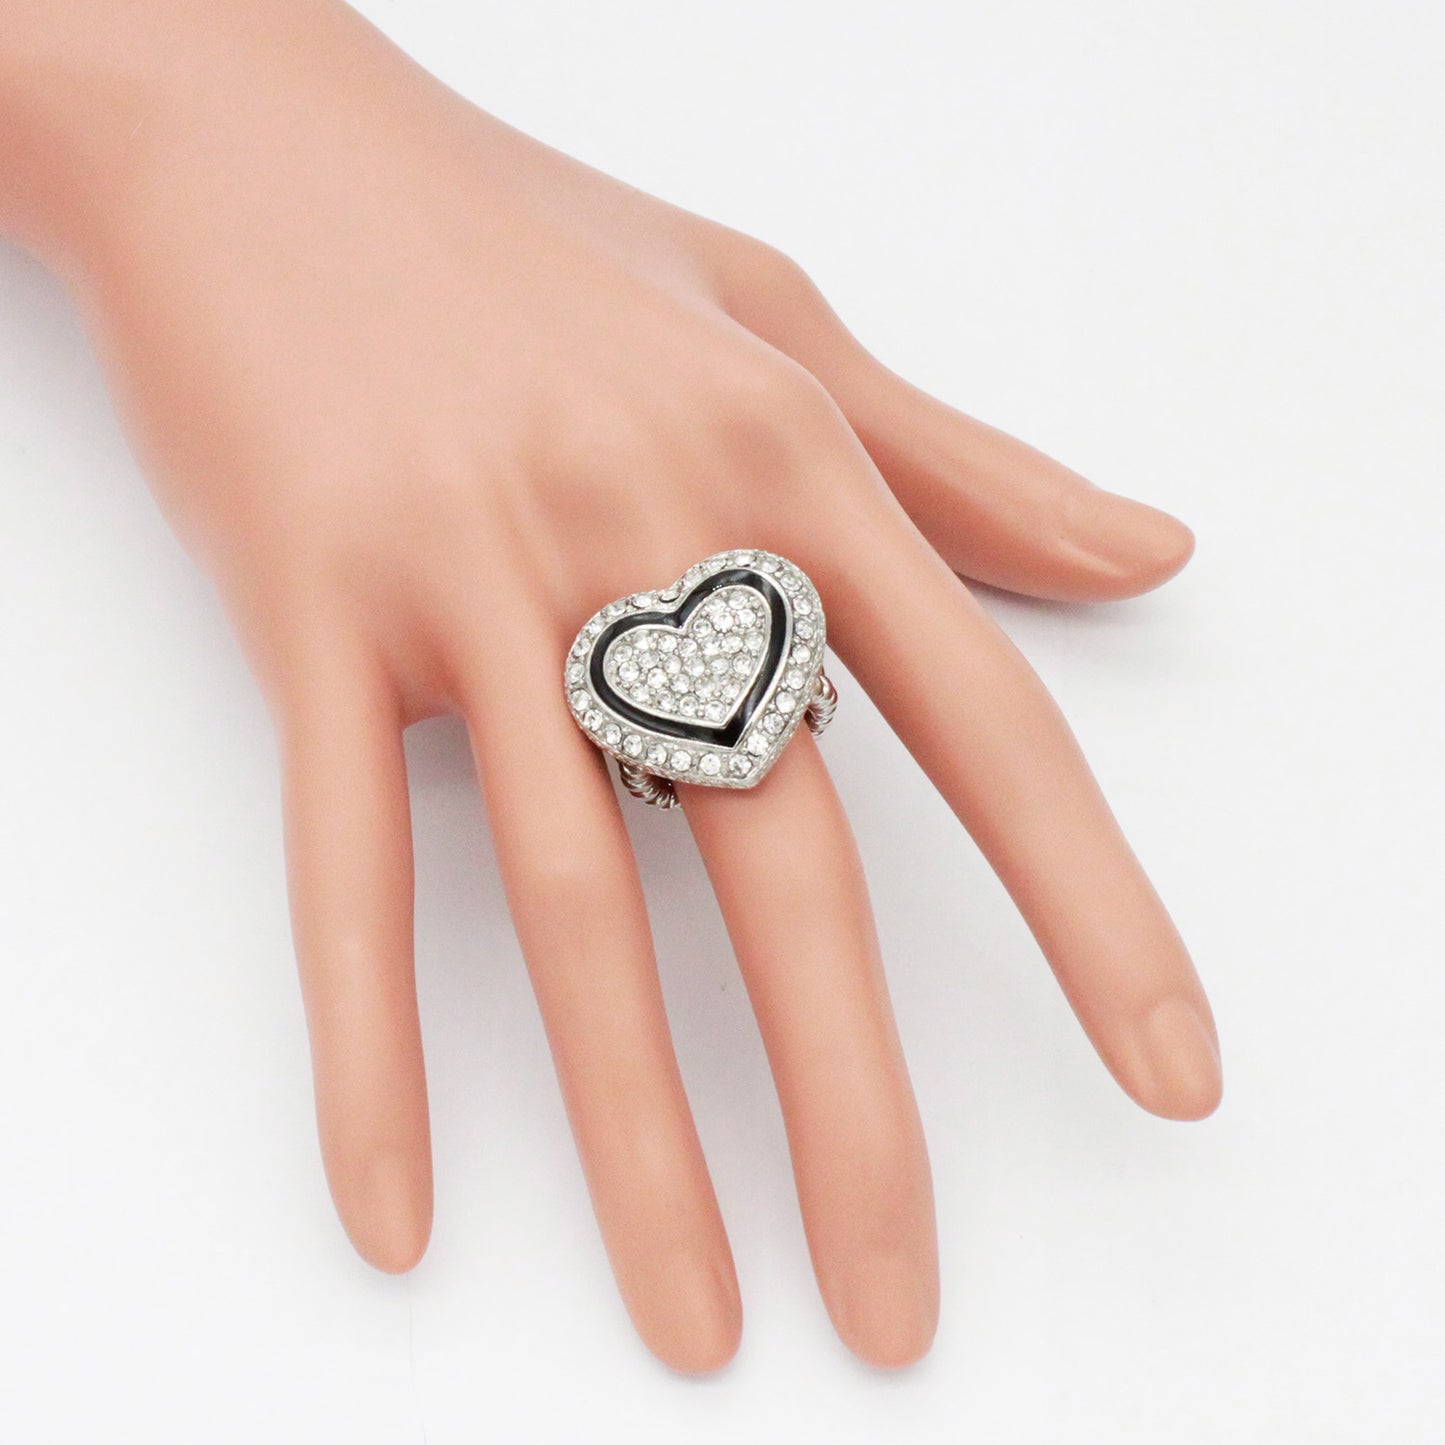 Lavencious Heart Shaped Rhinestones Stretch Rings for Women Size for 7-9 (Silver Clear)